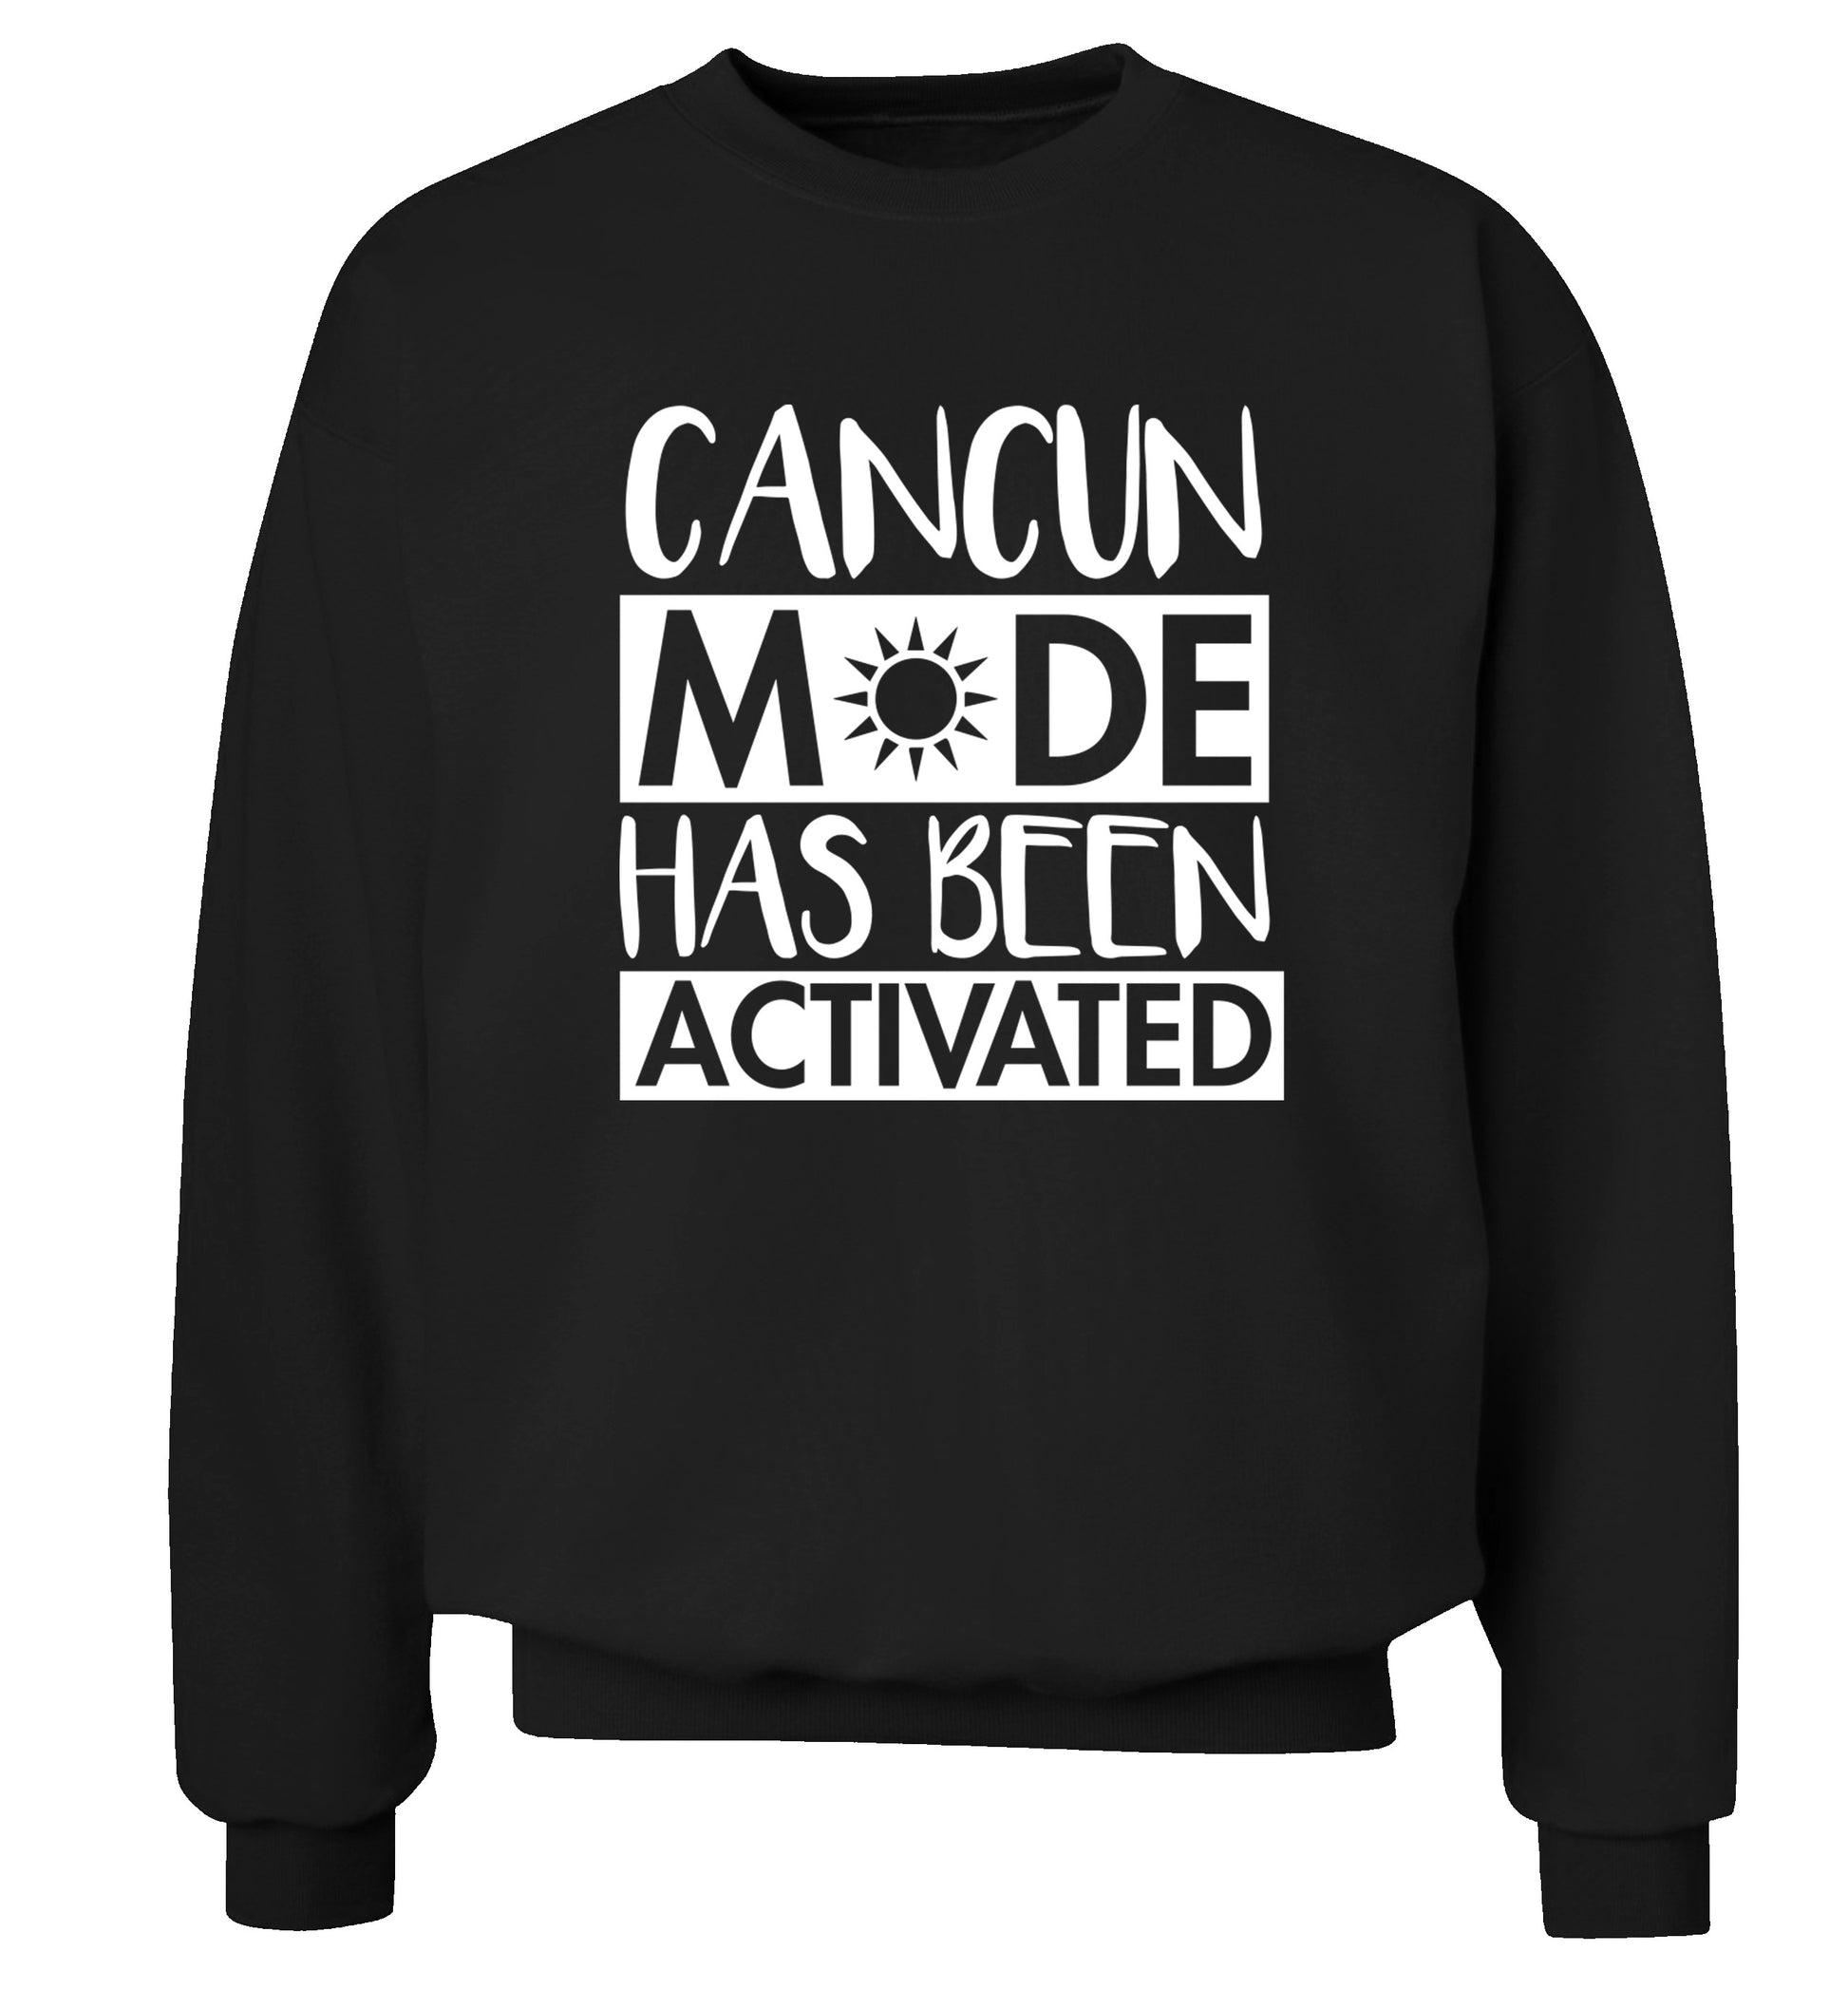 Cancun mode has been activated Adult's unisex black Sweater 2XL